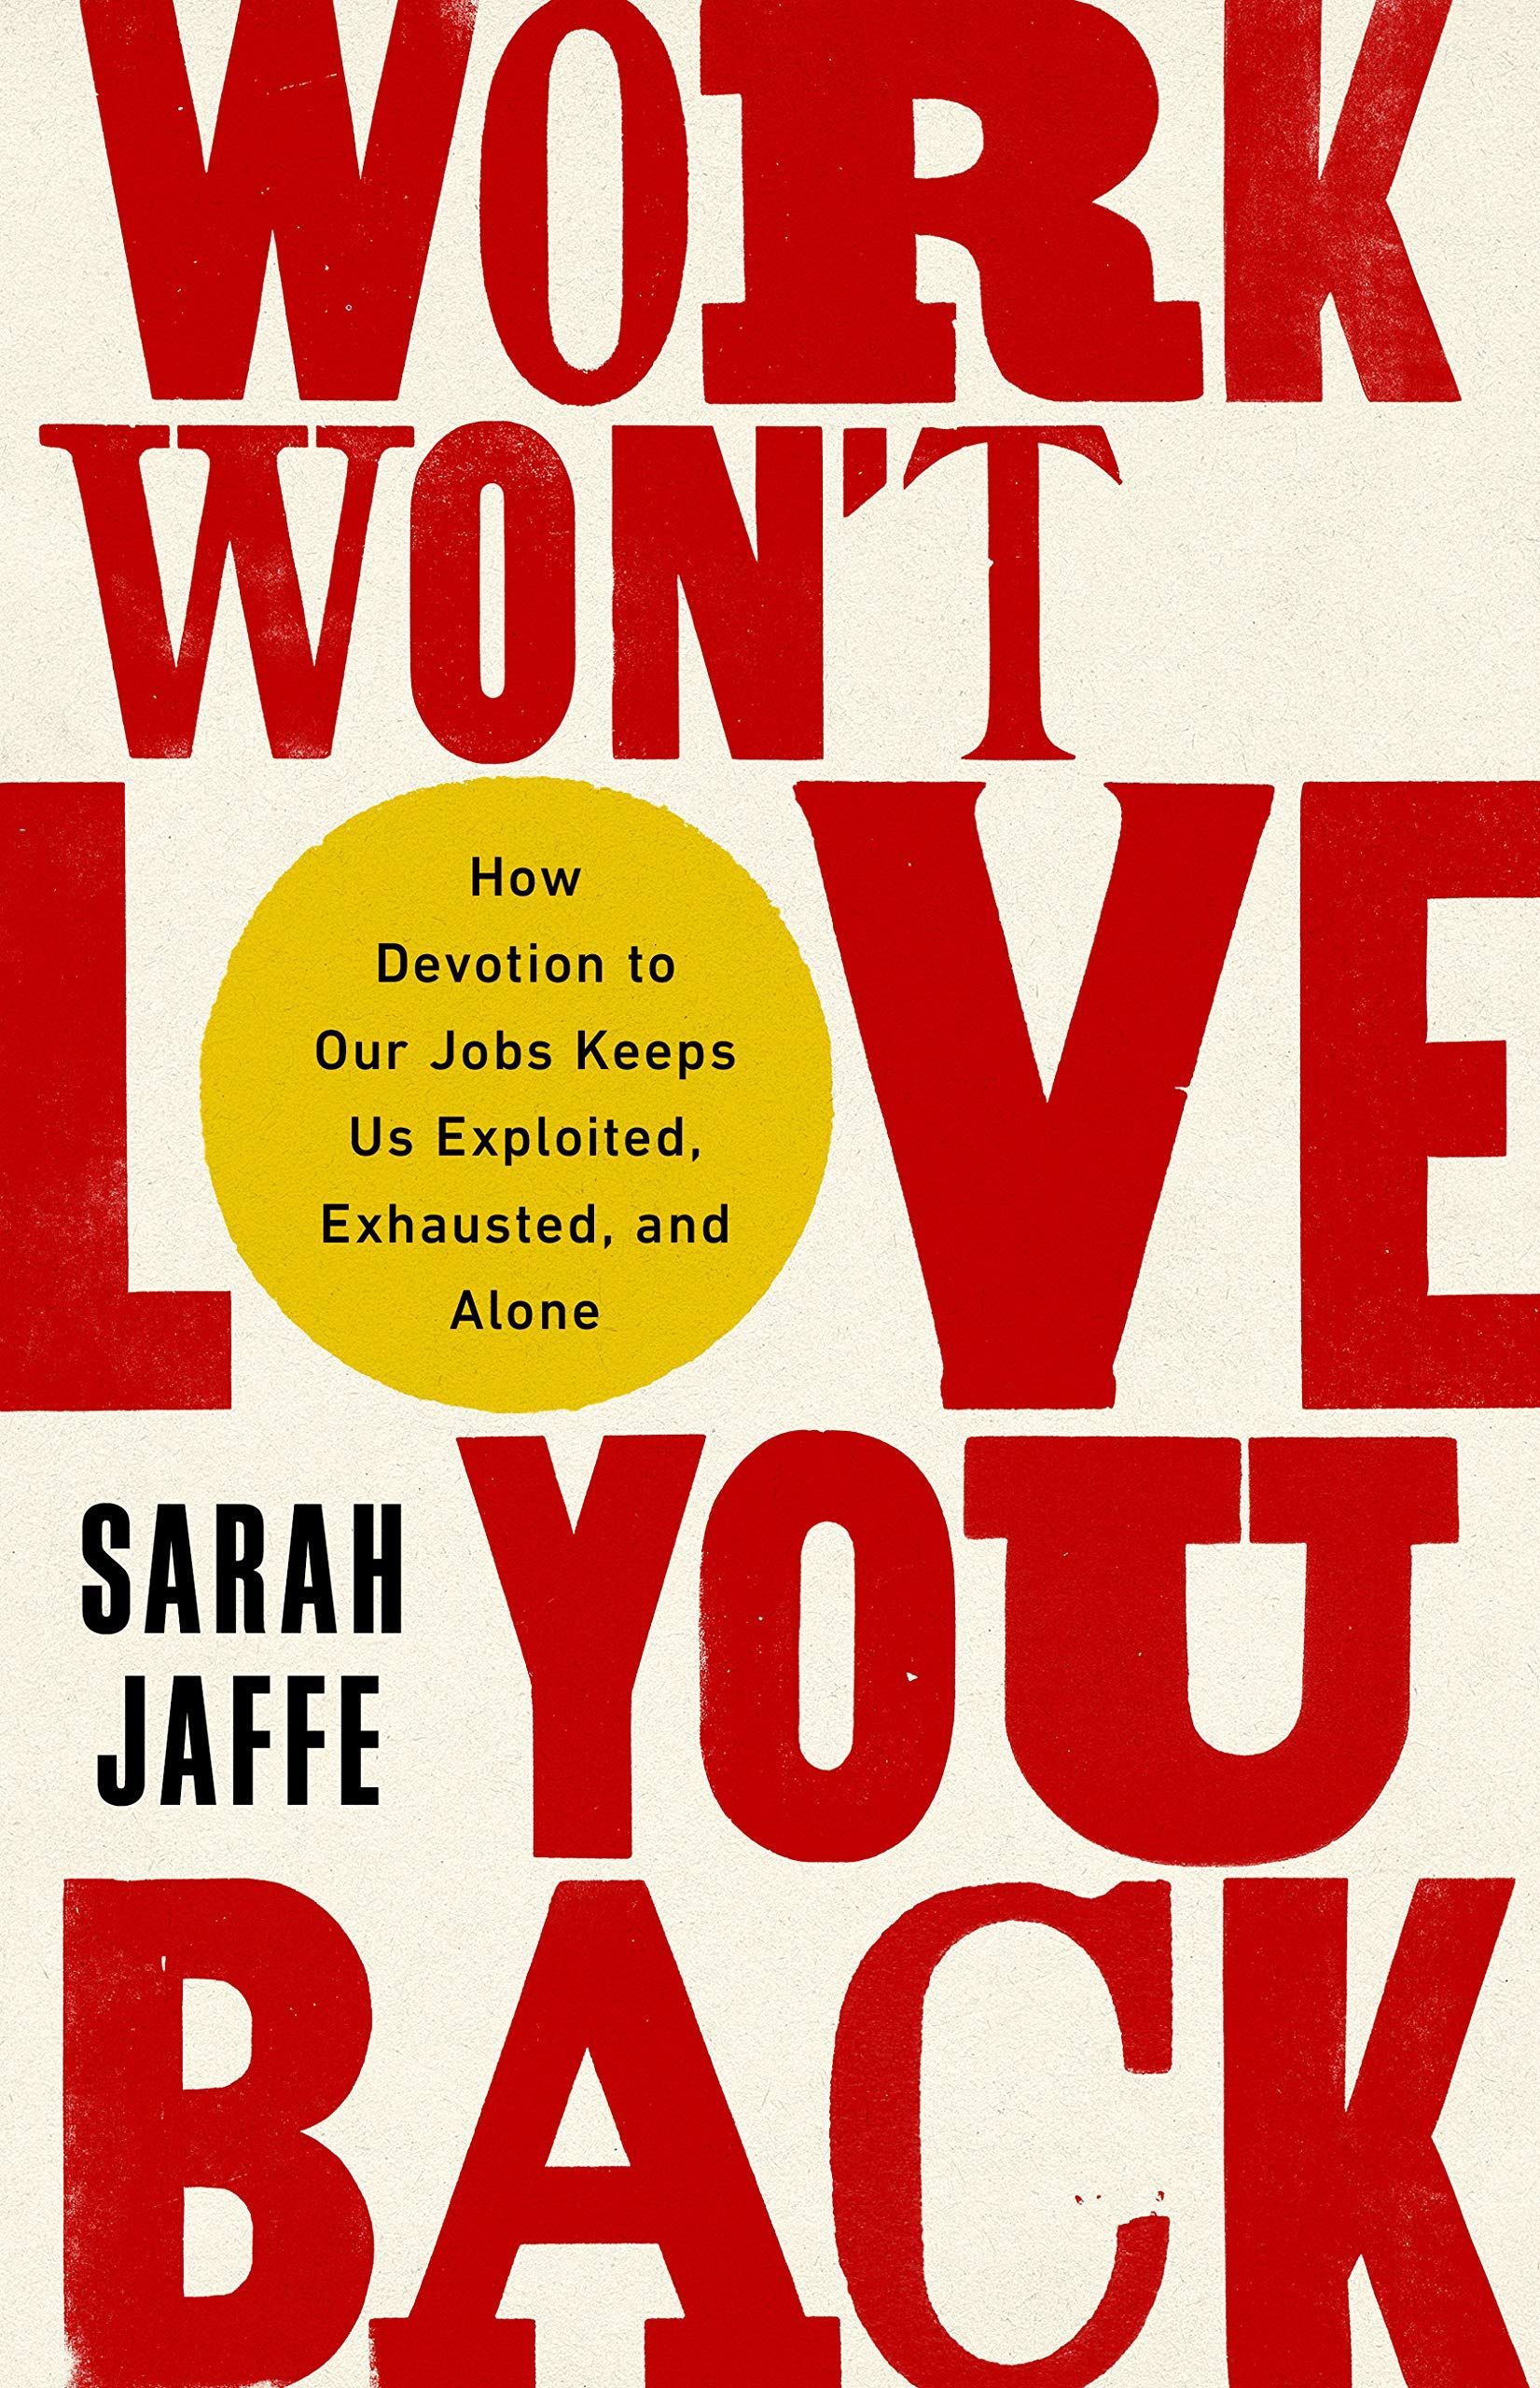 Keeping It in the Family: On Sarah Jaffe’s “Work Won’t Love You Back”